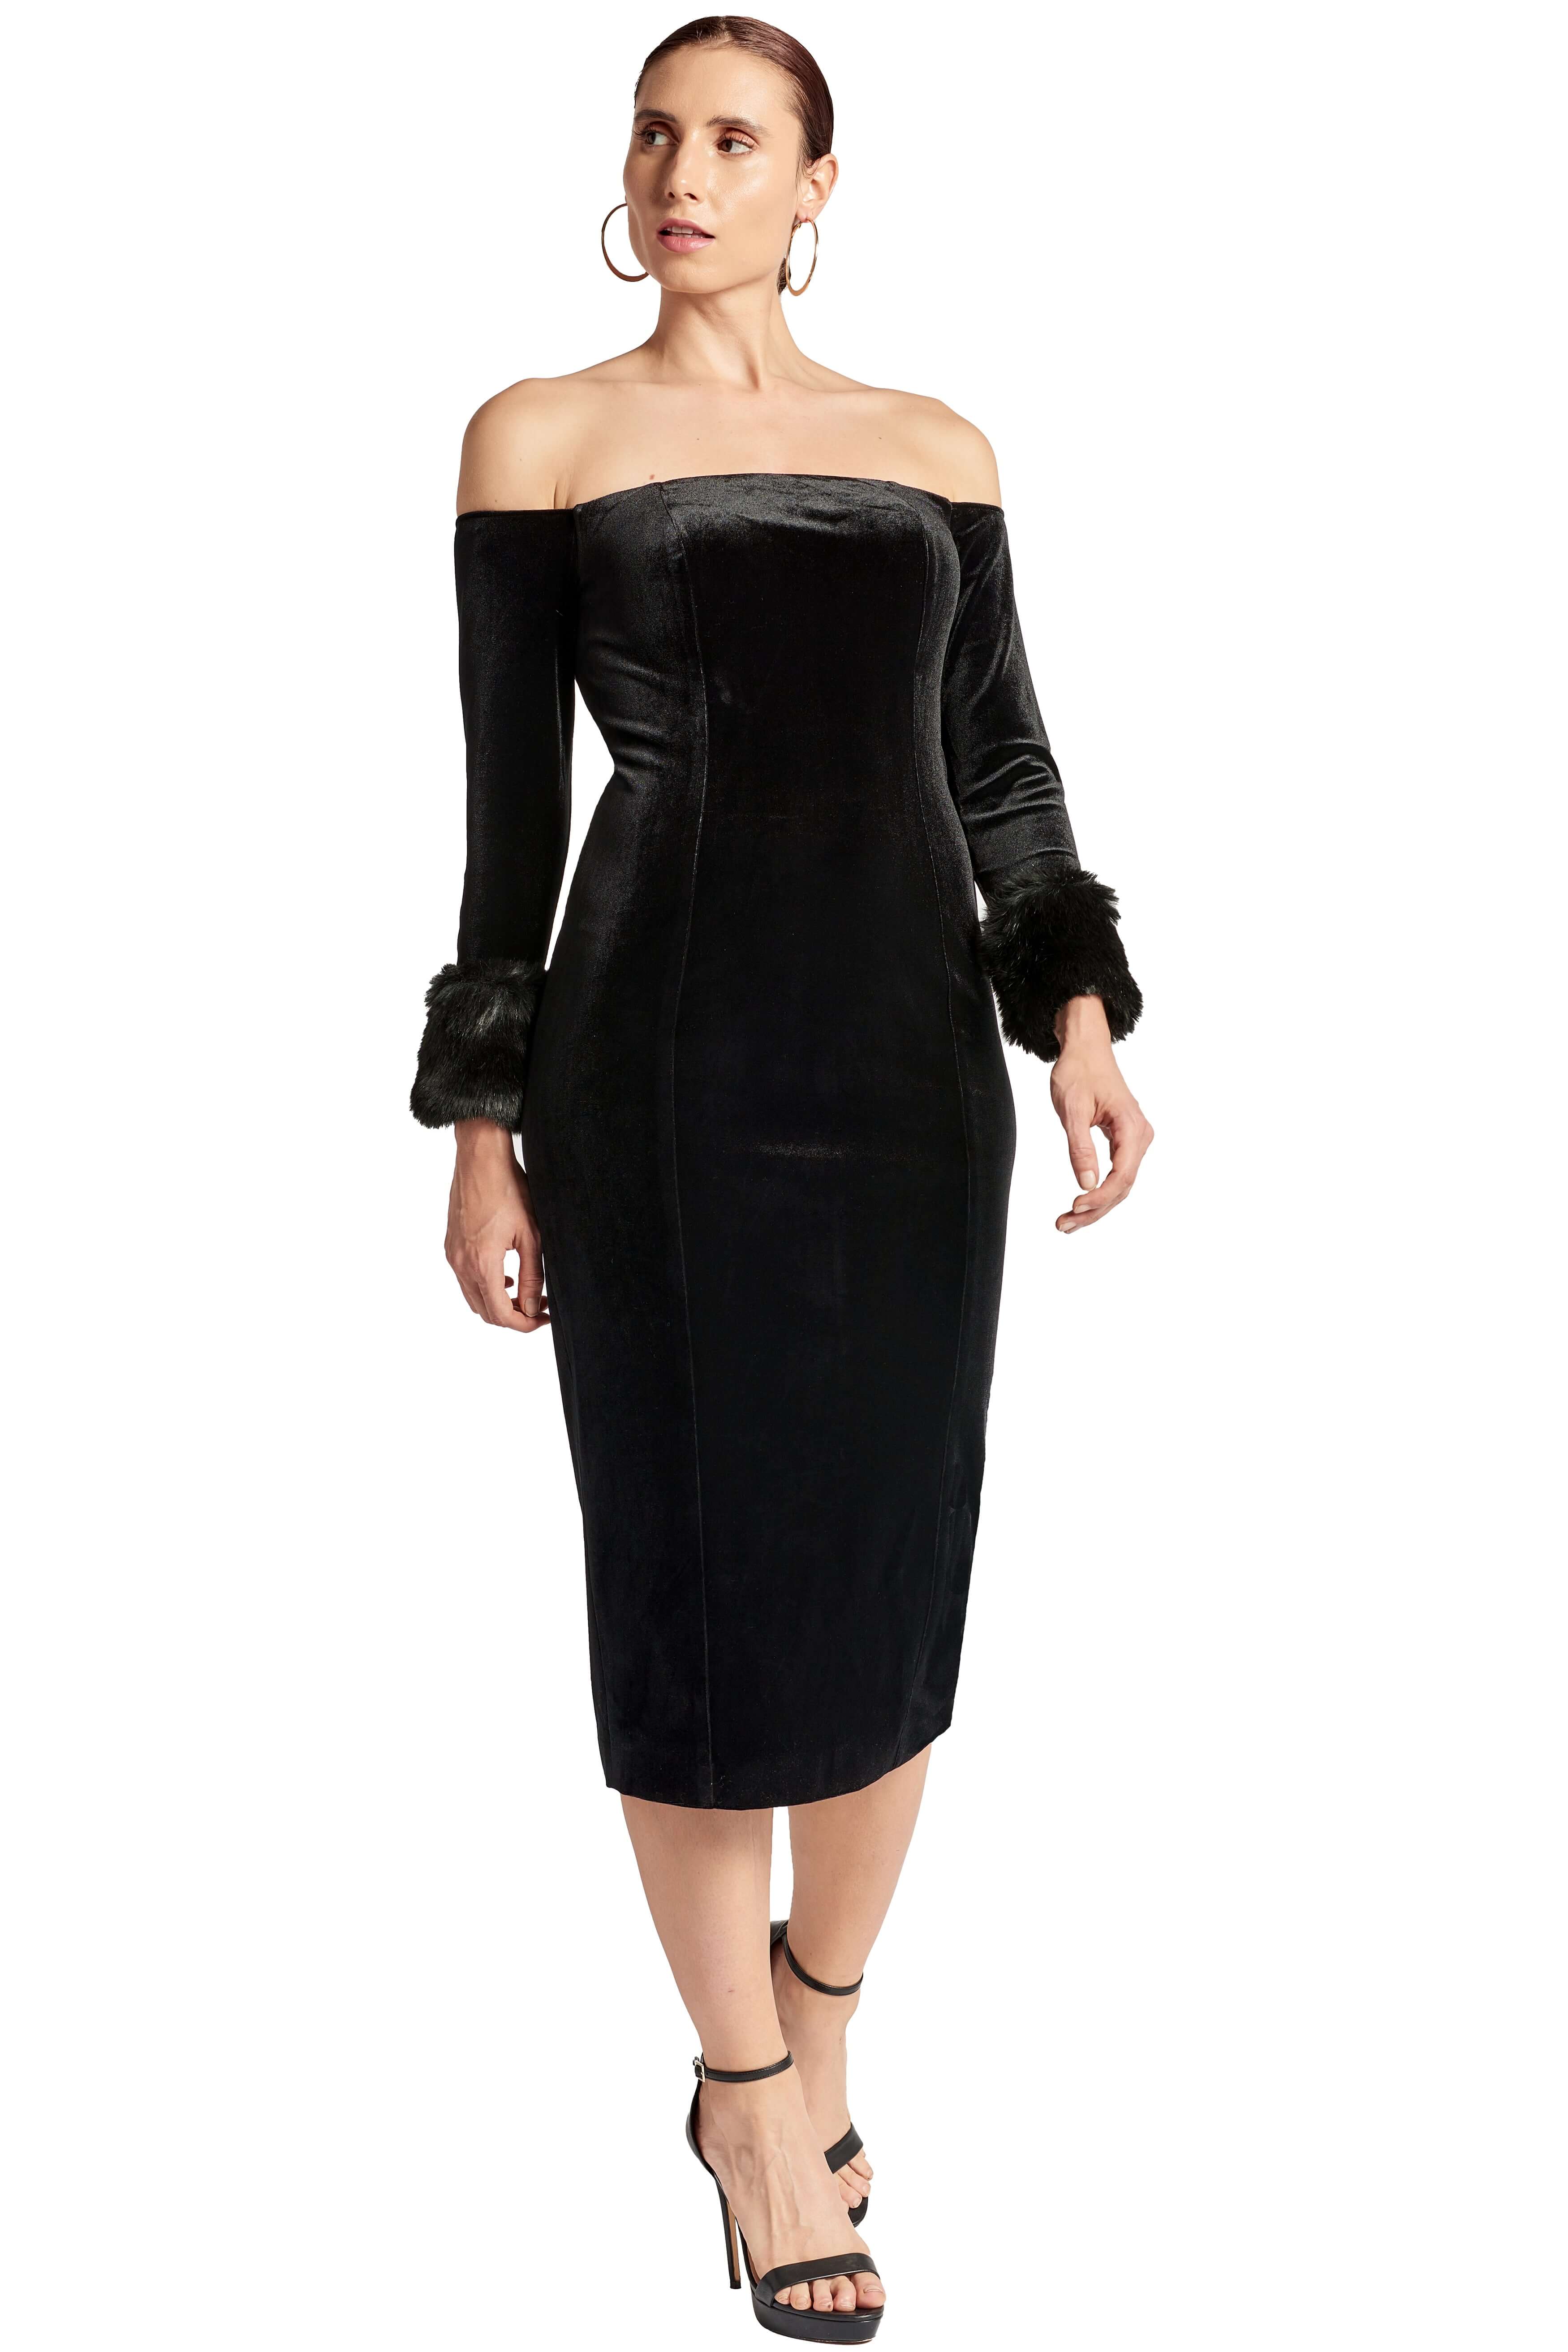 Front view of model wearing the Simona Maghen Joia Dress, off the shoulder black velvet fitted midi dress with long sleeves and faux fur cuffs.